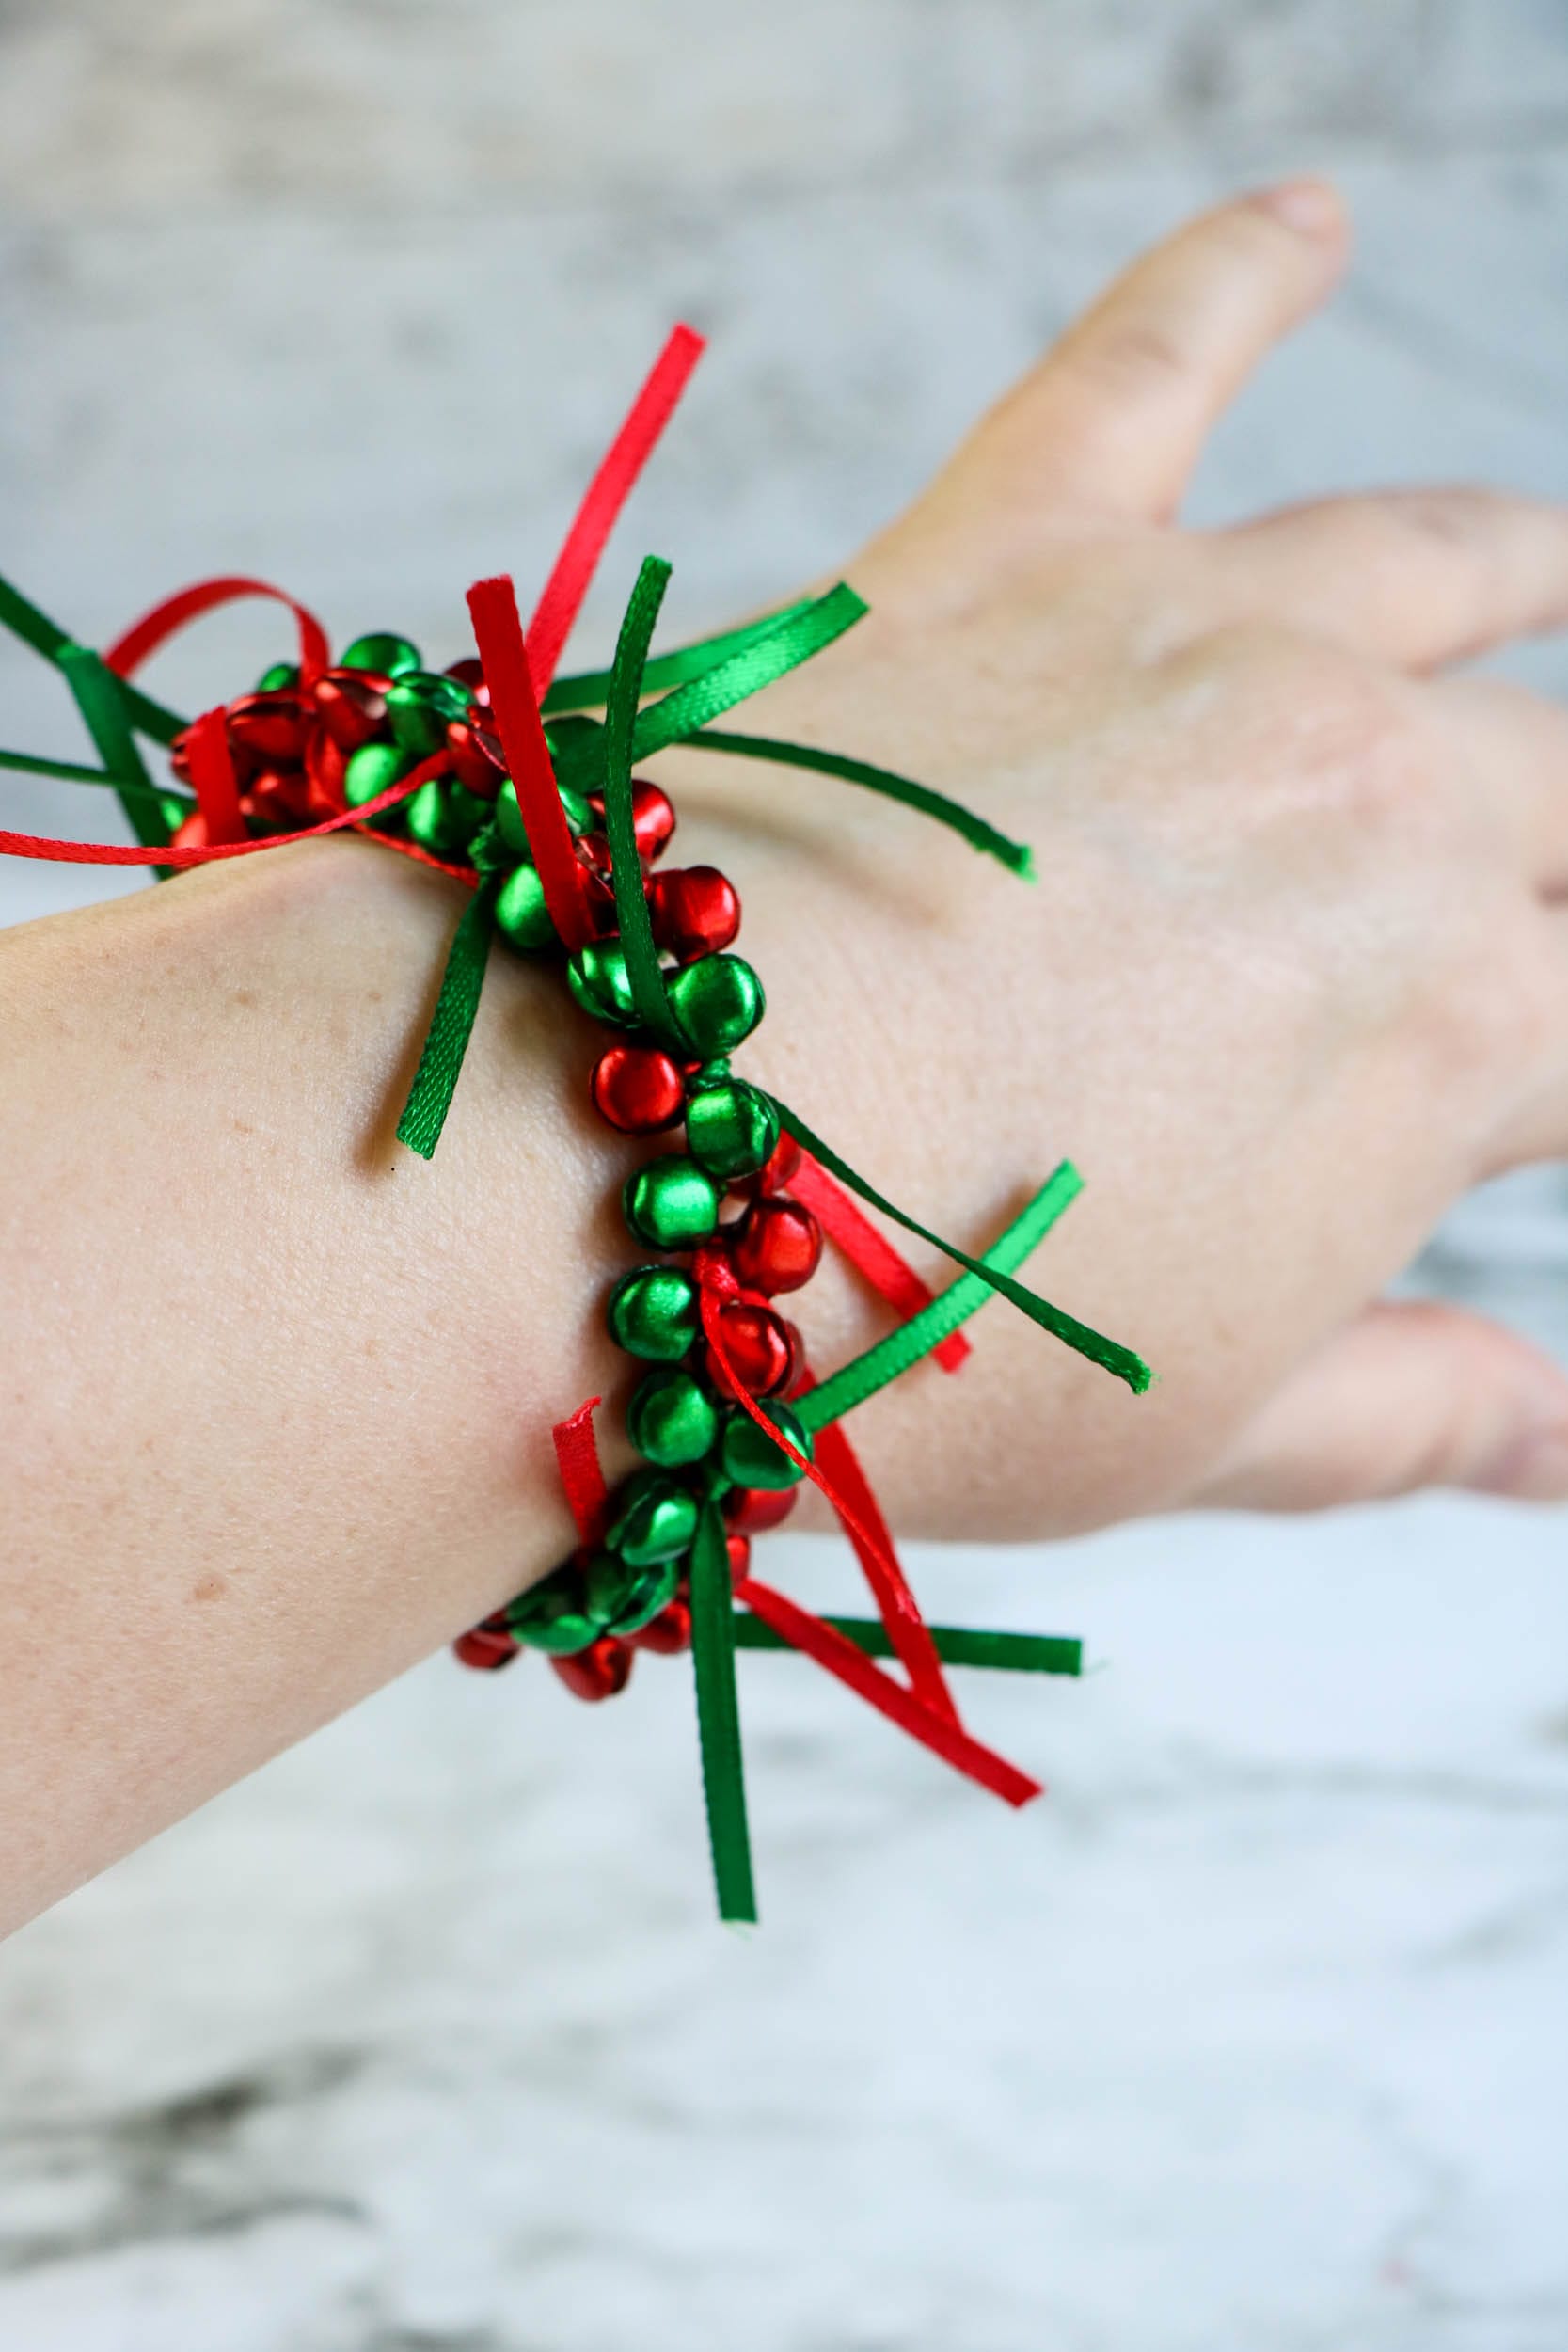 This DIY Jingle Bells Christmas Bracelet is the perfect way to spend time with your loved ones and make great memories and gift.